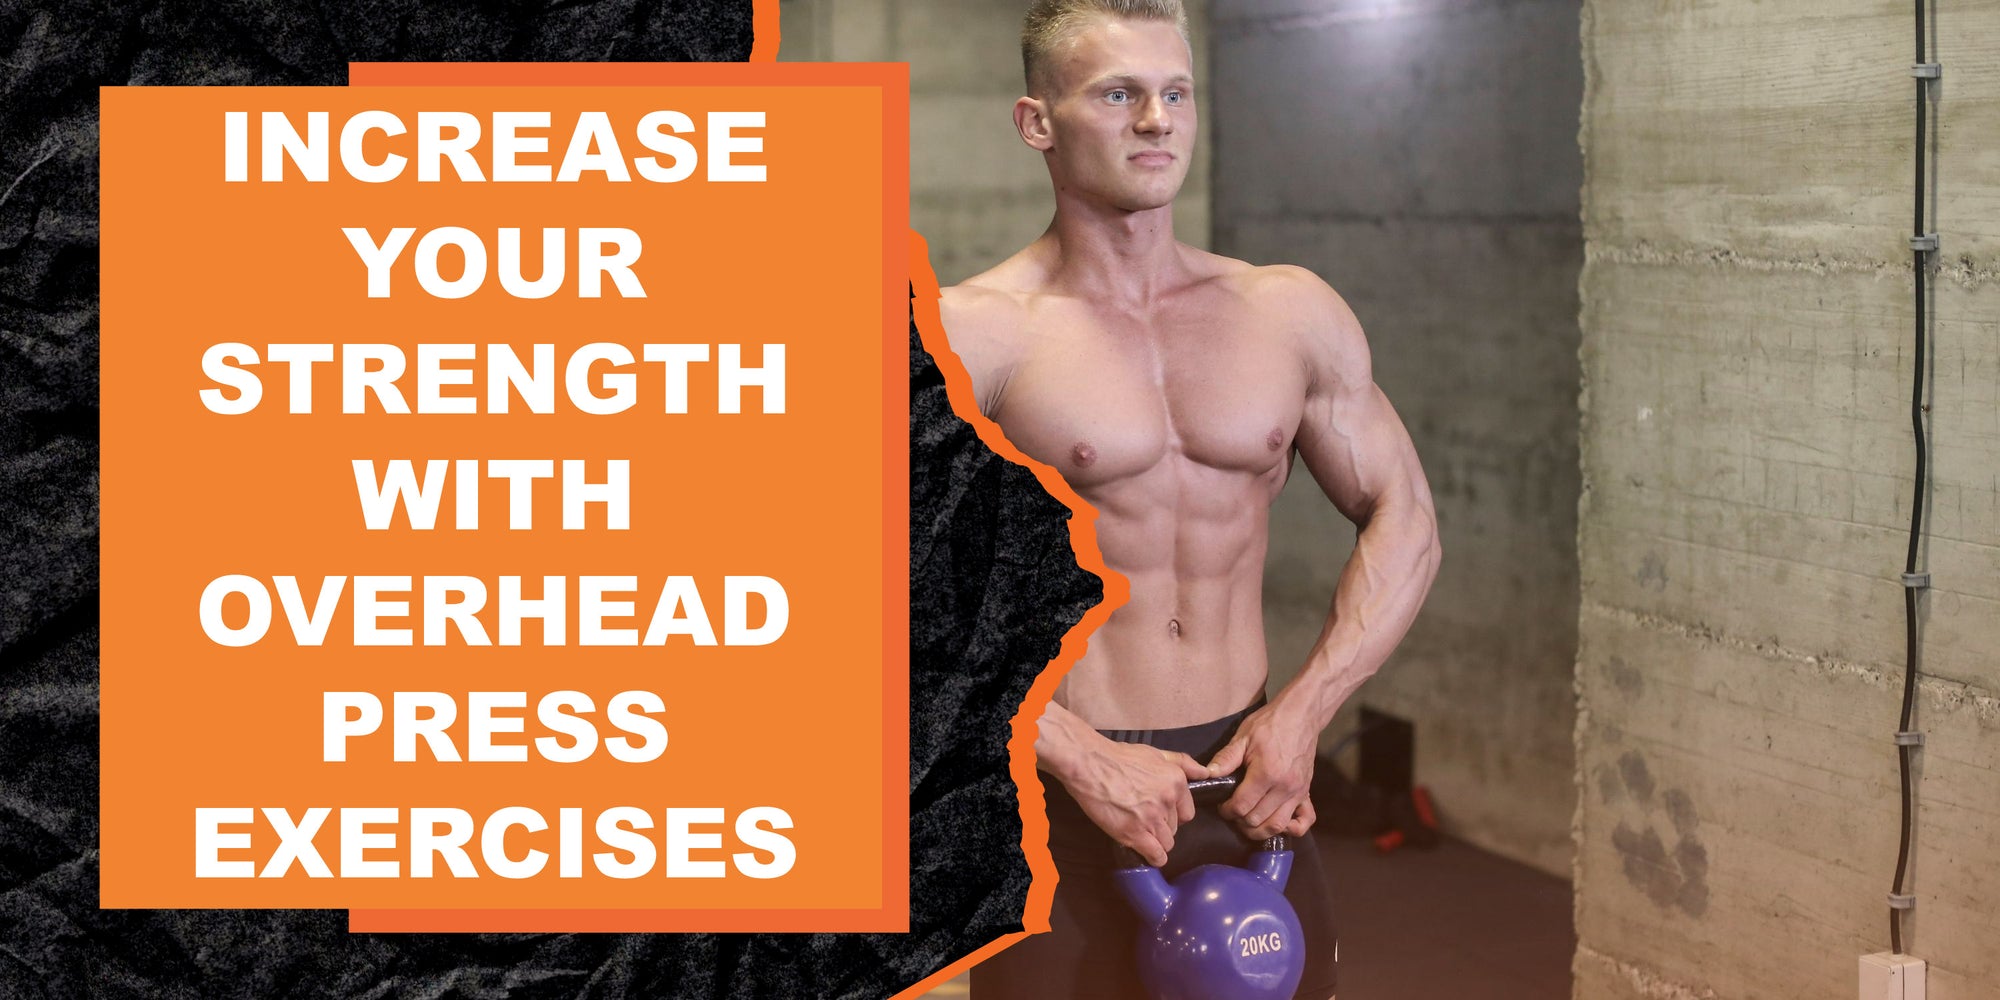 How to Increase Your Strength Without Lifting Heavy Weights with Overhead Press Exercises